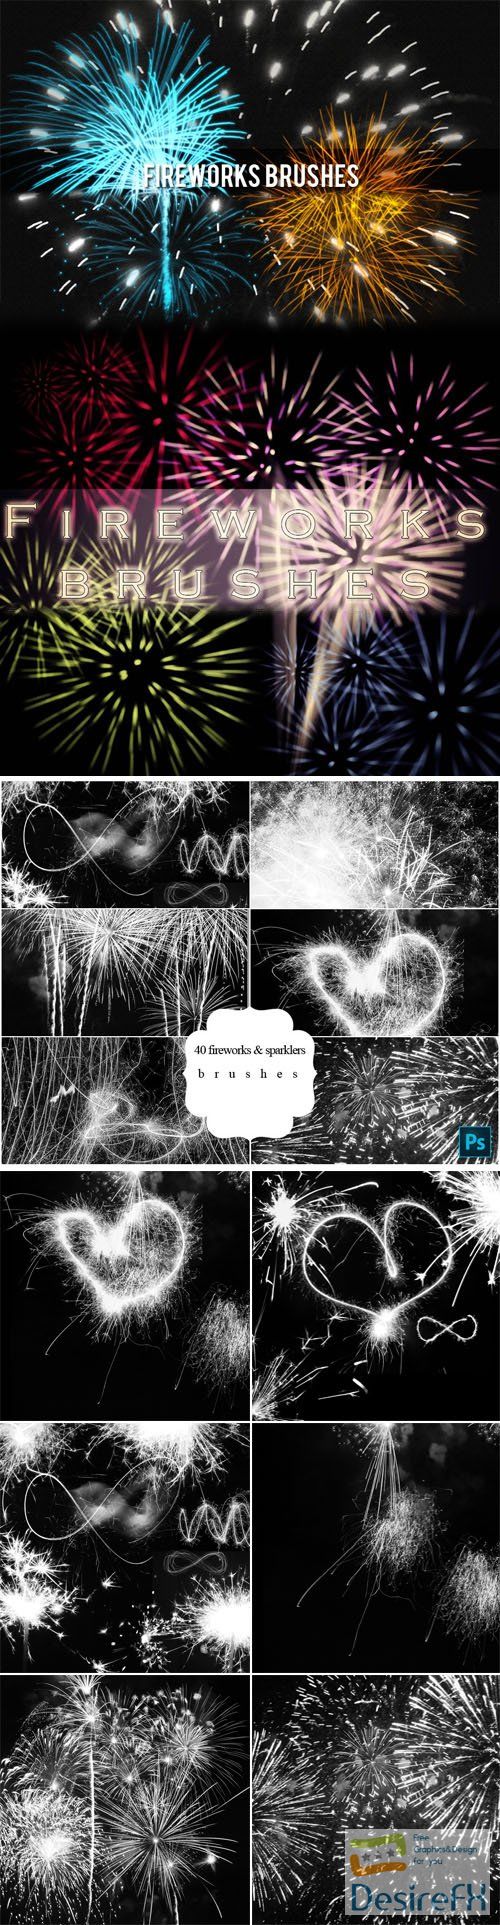 60+ Fireworks & Sparklers Brushes Collection for Photoshop